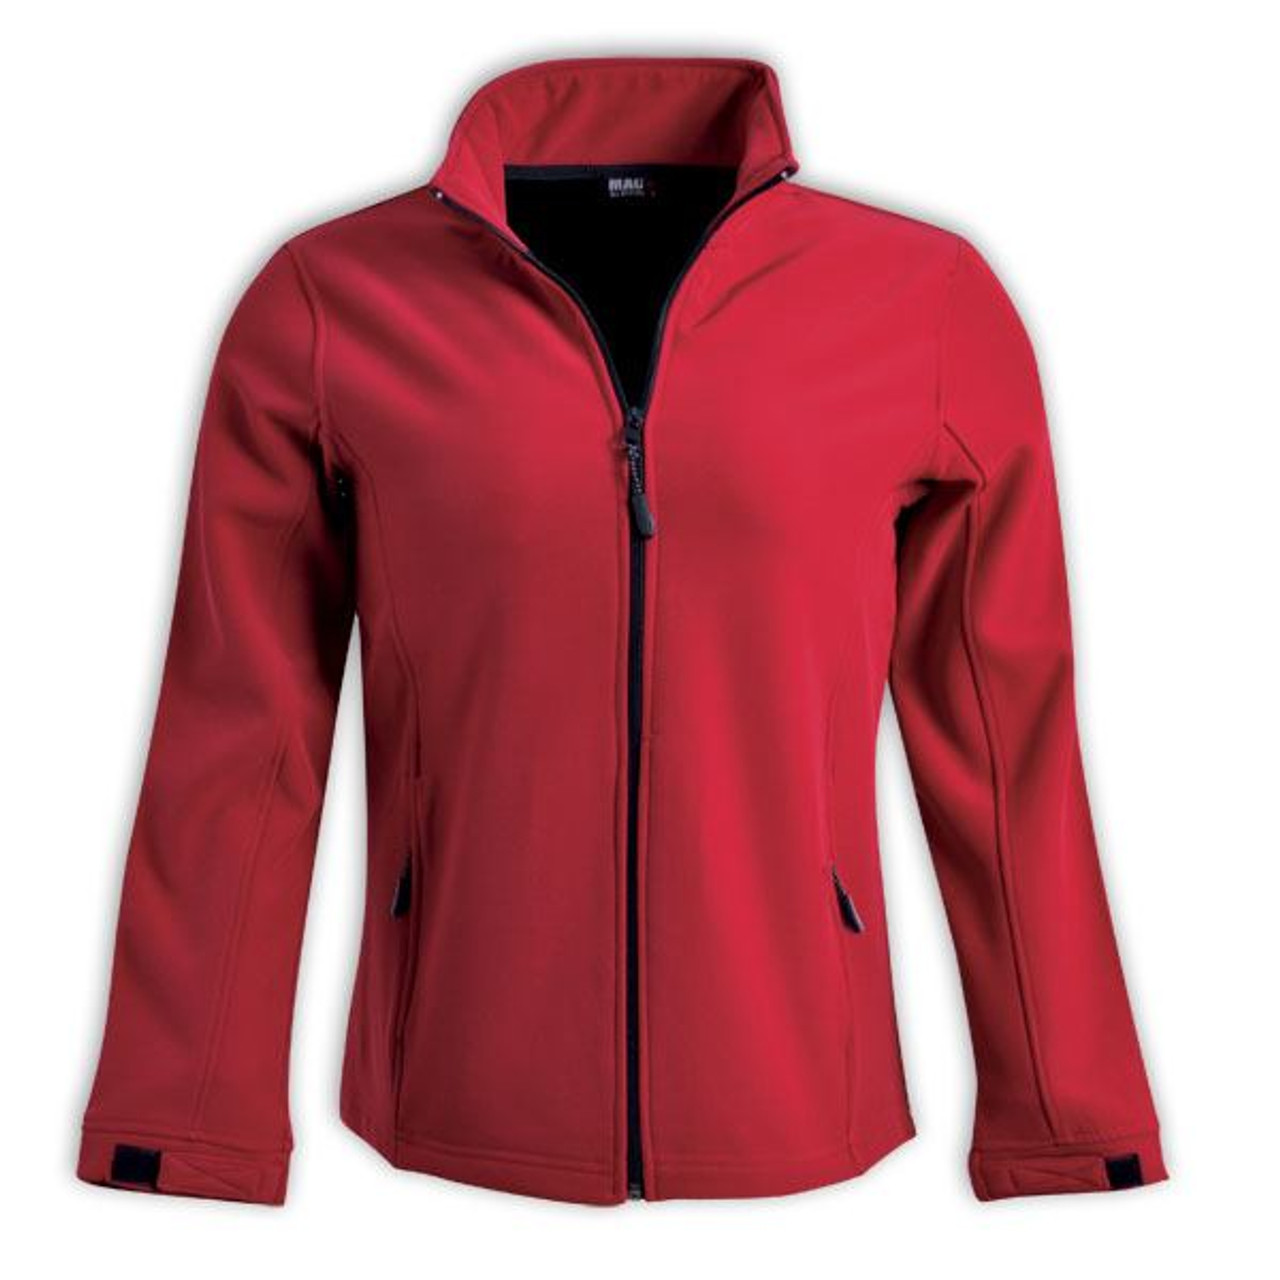 Classic Softshell Jacket - Ladies | Azulwear Online Store, Cape Town ...